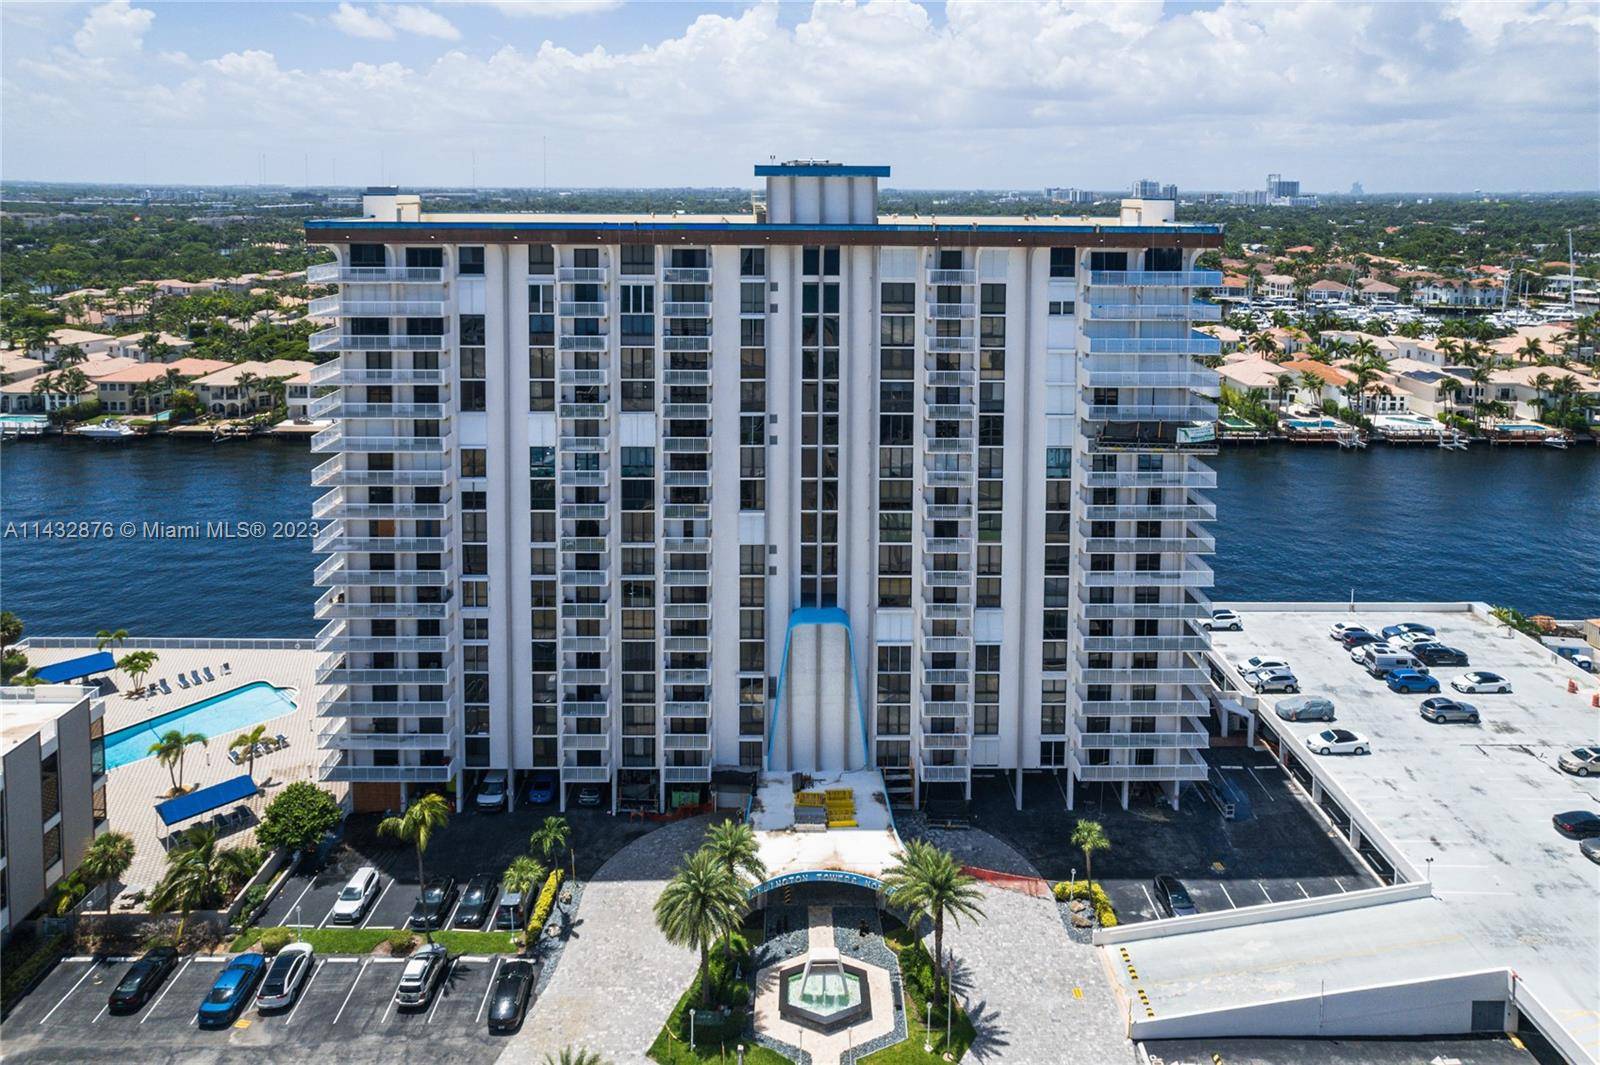 JUST REDUCED ! ! ! BEAUTIFUL 2 2 CORNER UNIT COMPLETELY RENOVATED CONDO HAS A WRAP AROUND BALCONY OFFERING AMAZING VIEWS OF THE INTRACOASTAL AND THE OCEAN.